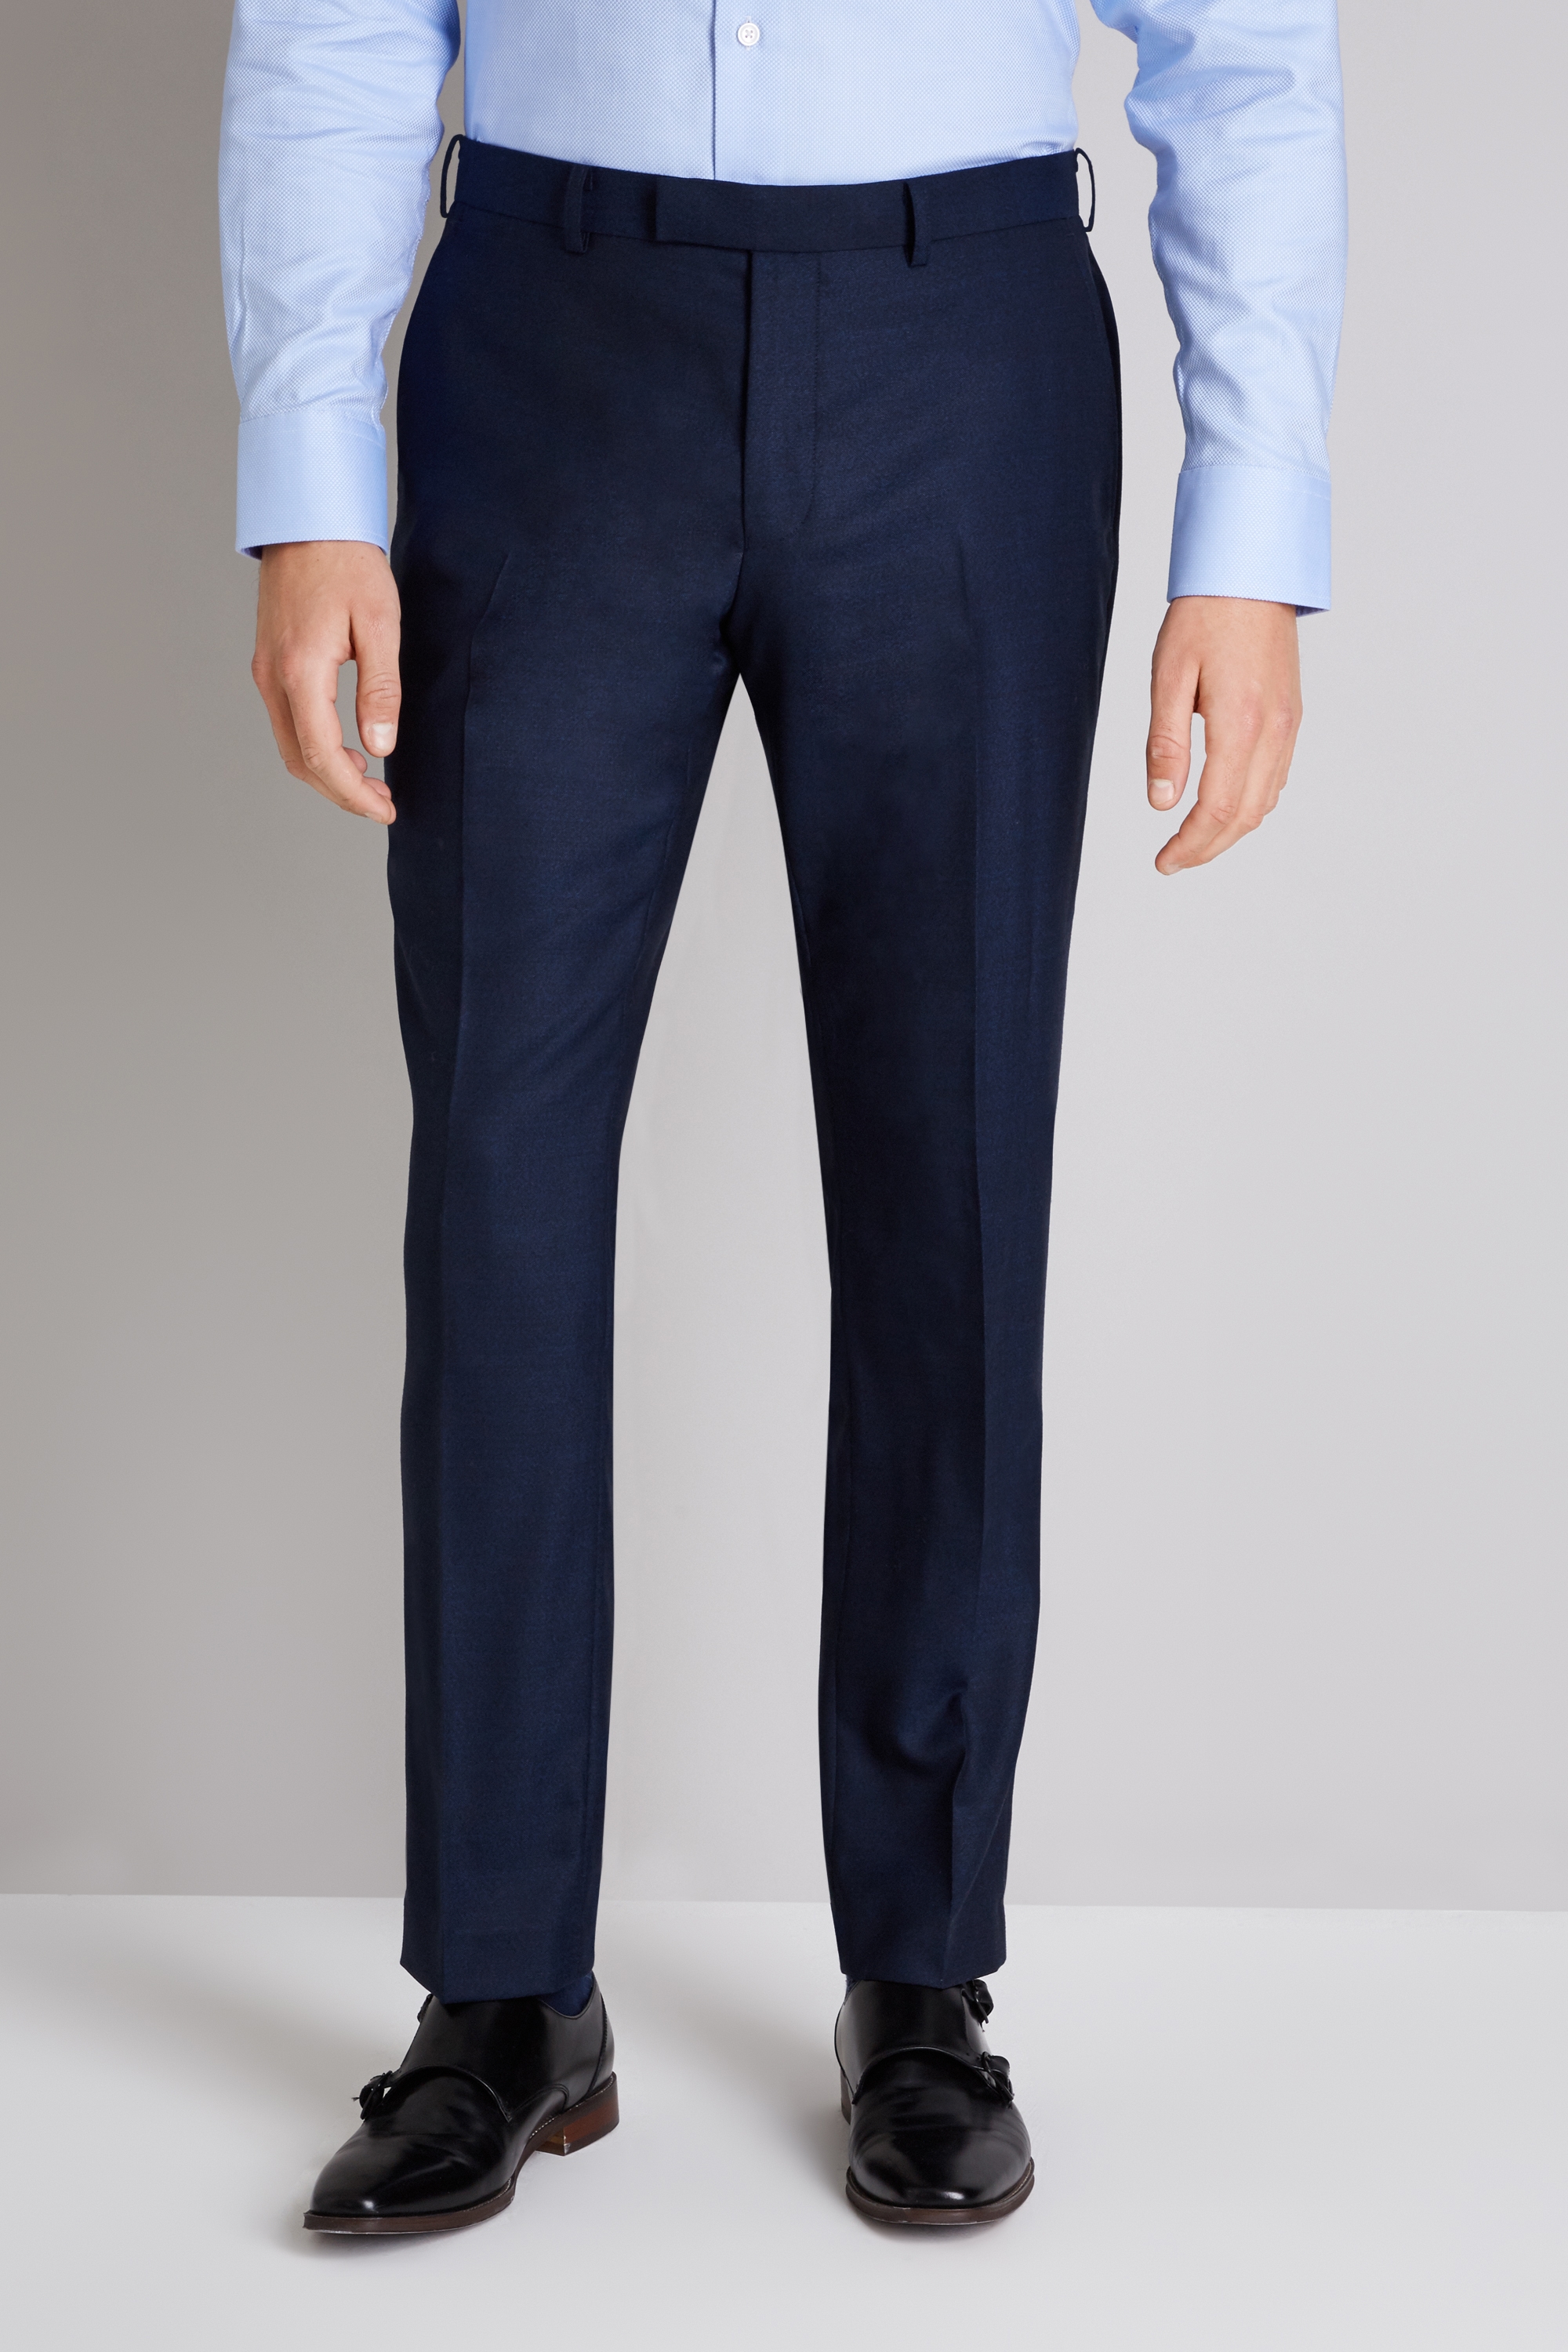 Ermenegildo Zegna Cloth Tailored Fit Ink Trousers | Buy Online at Moss